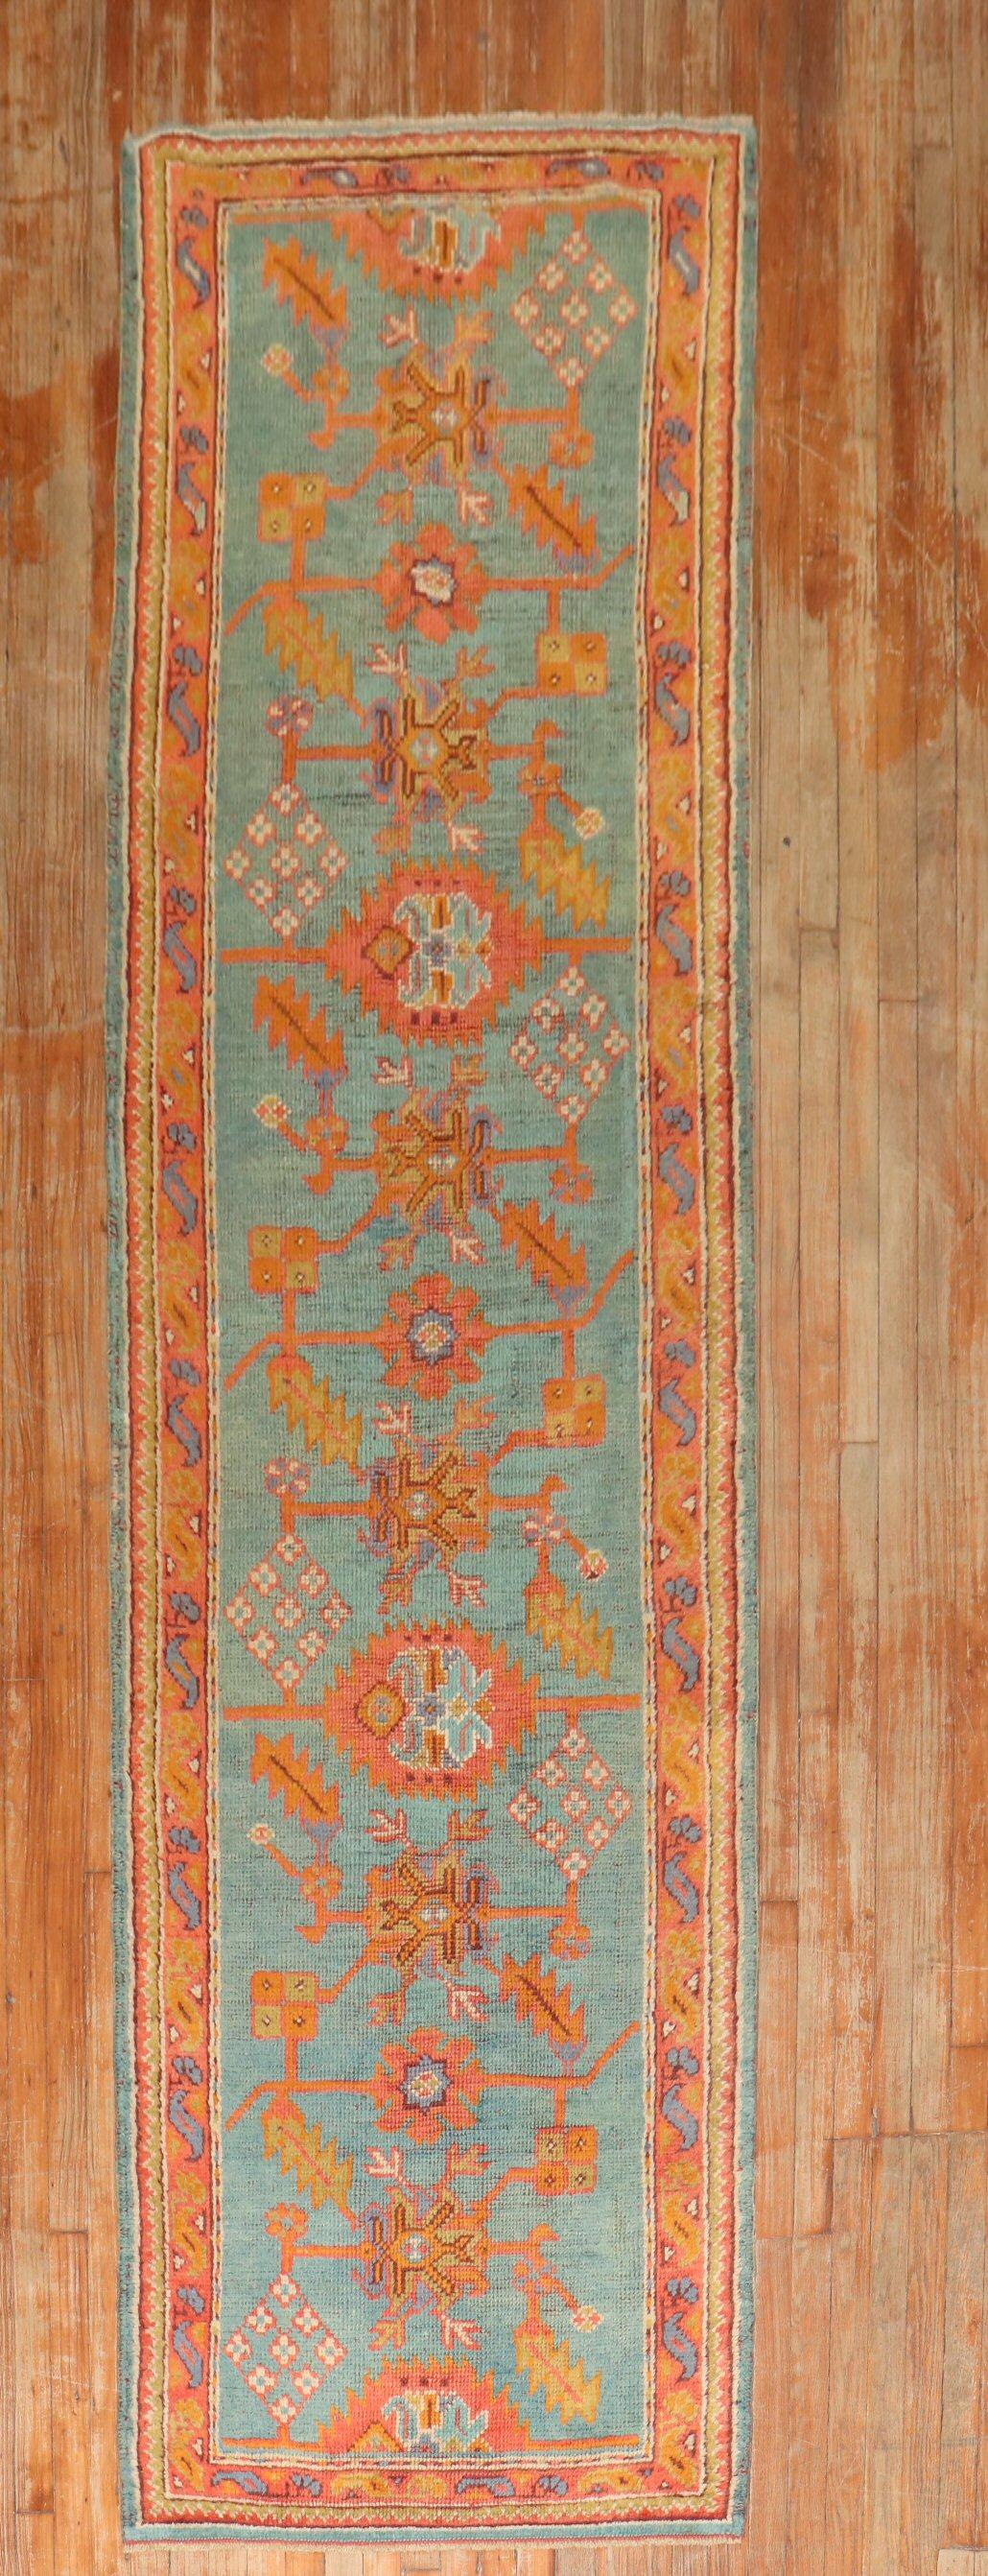 An early 20th century Antique turkish oushak runner

size 3' x 12' (91 x 366 cm).